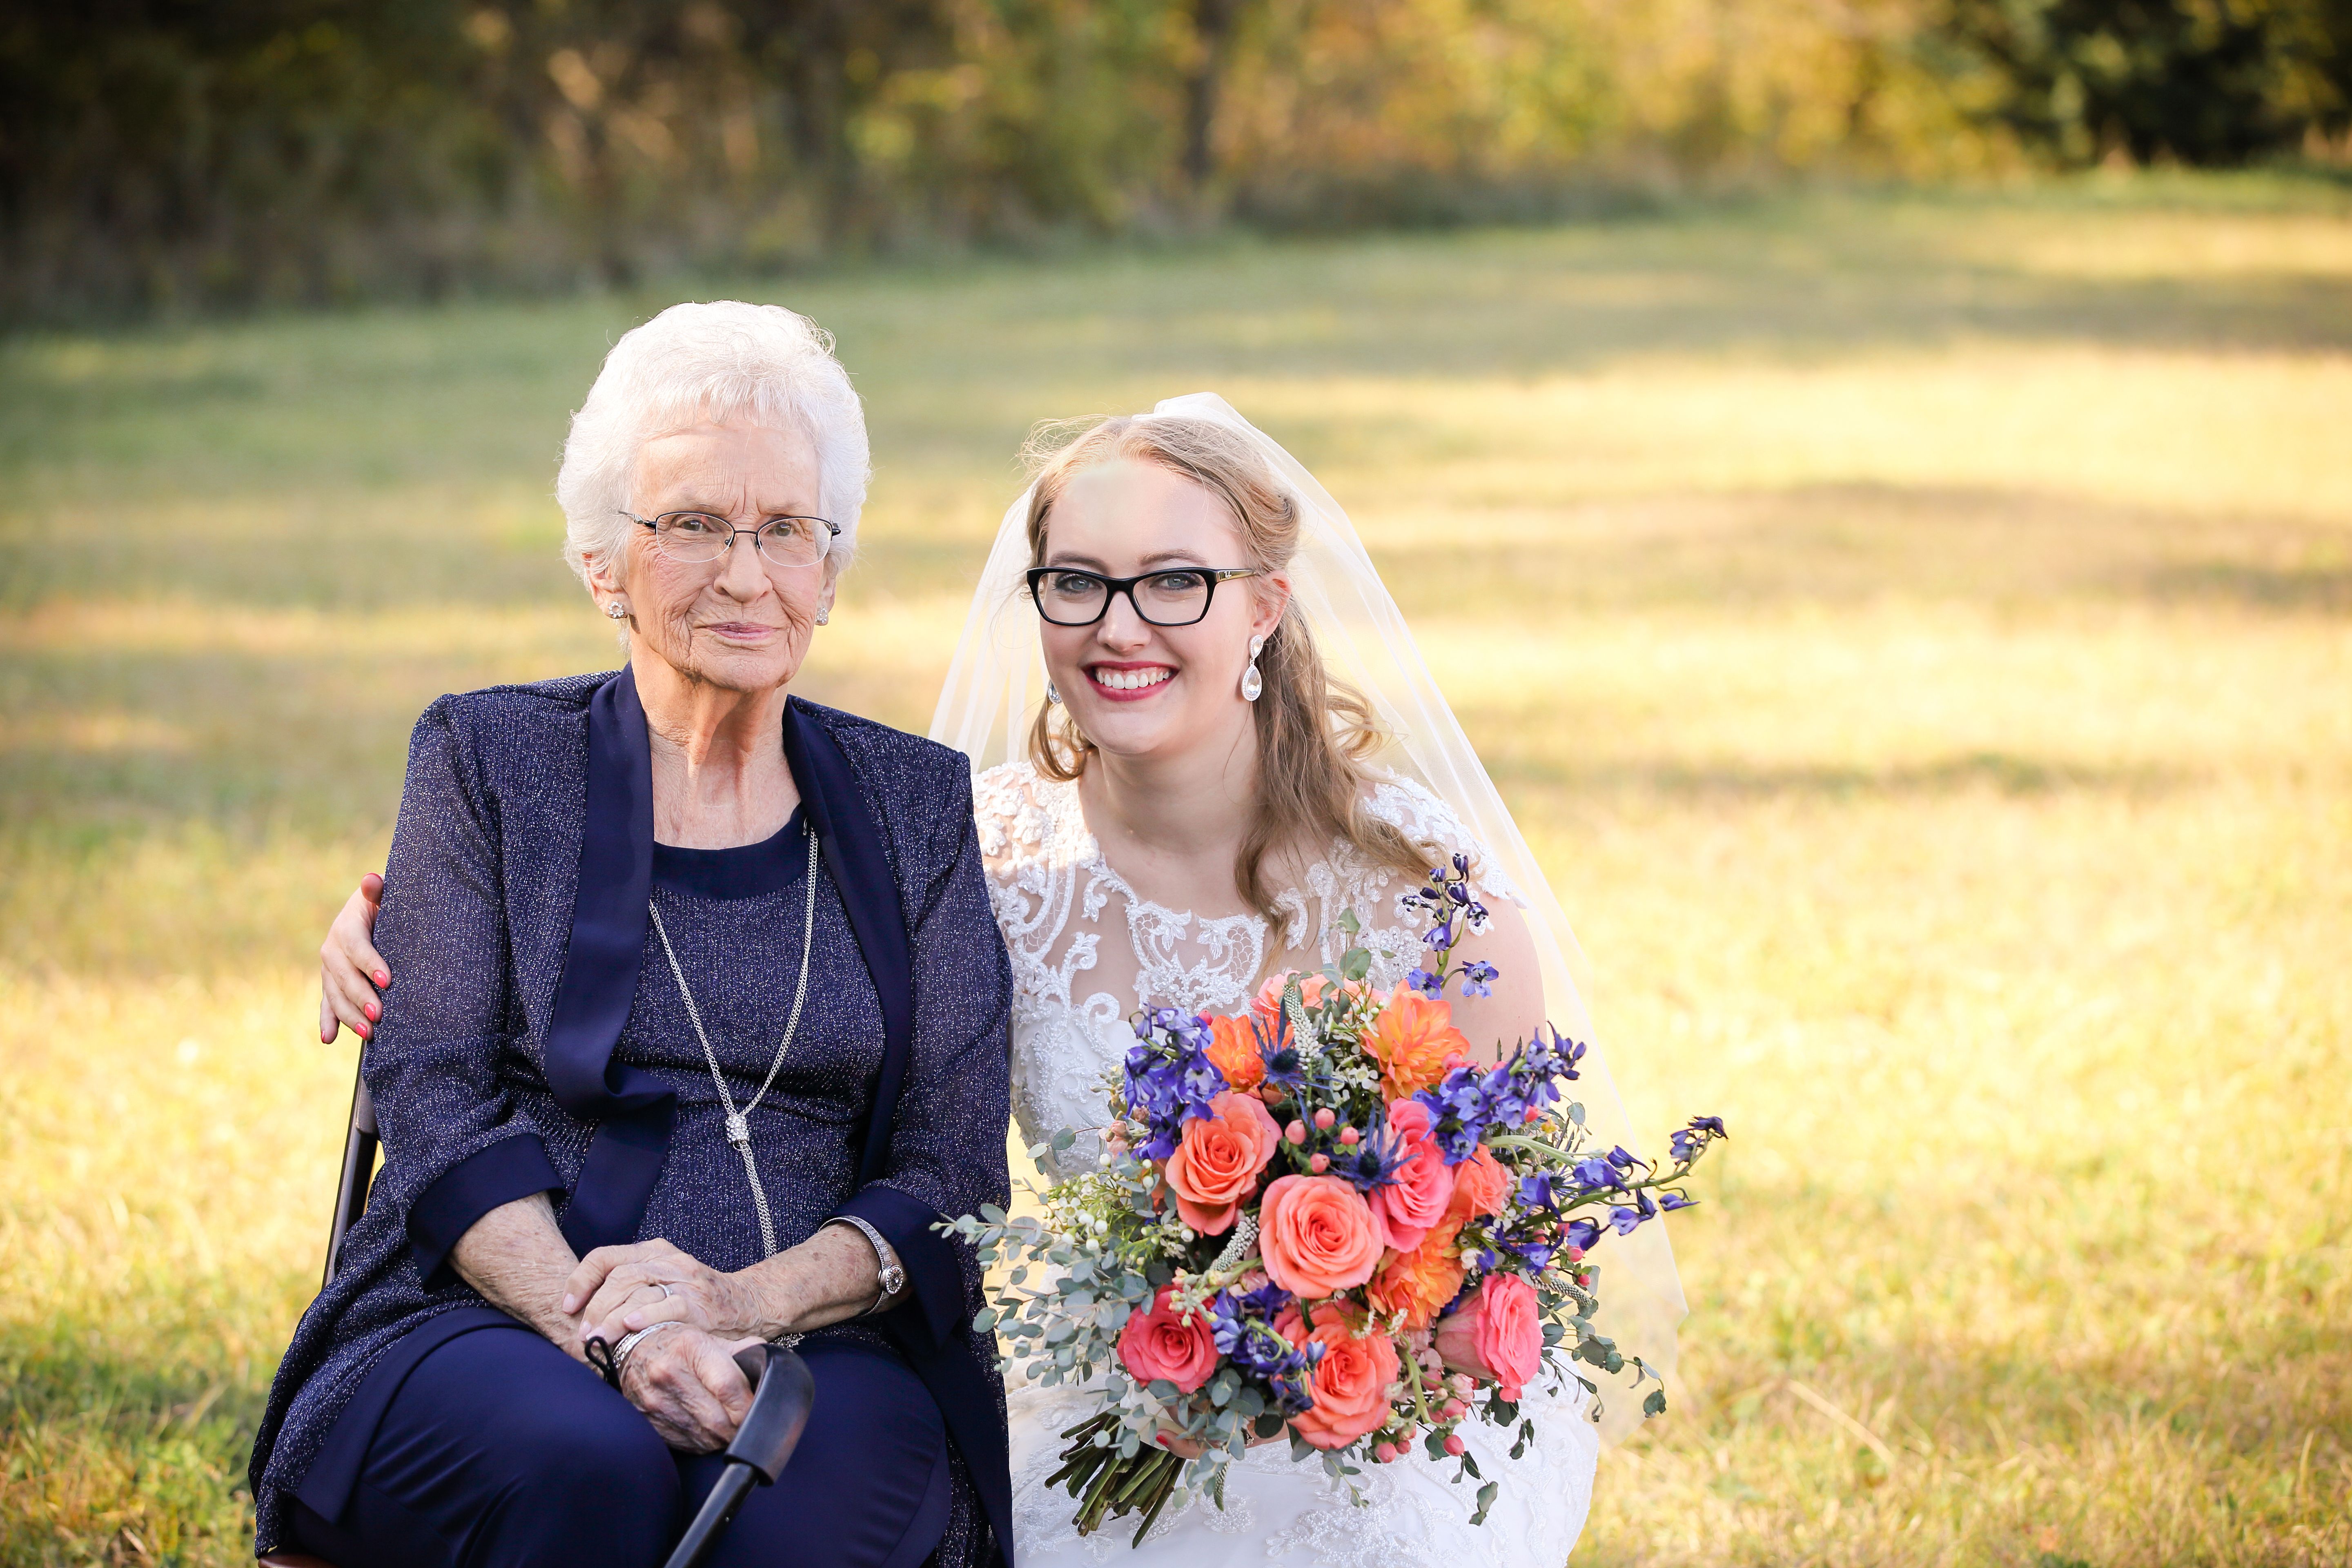 Cassey, in a wedding dress, embraces a well-dressed elderly woman